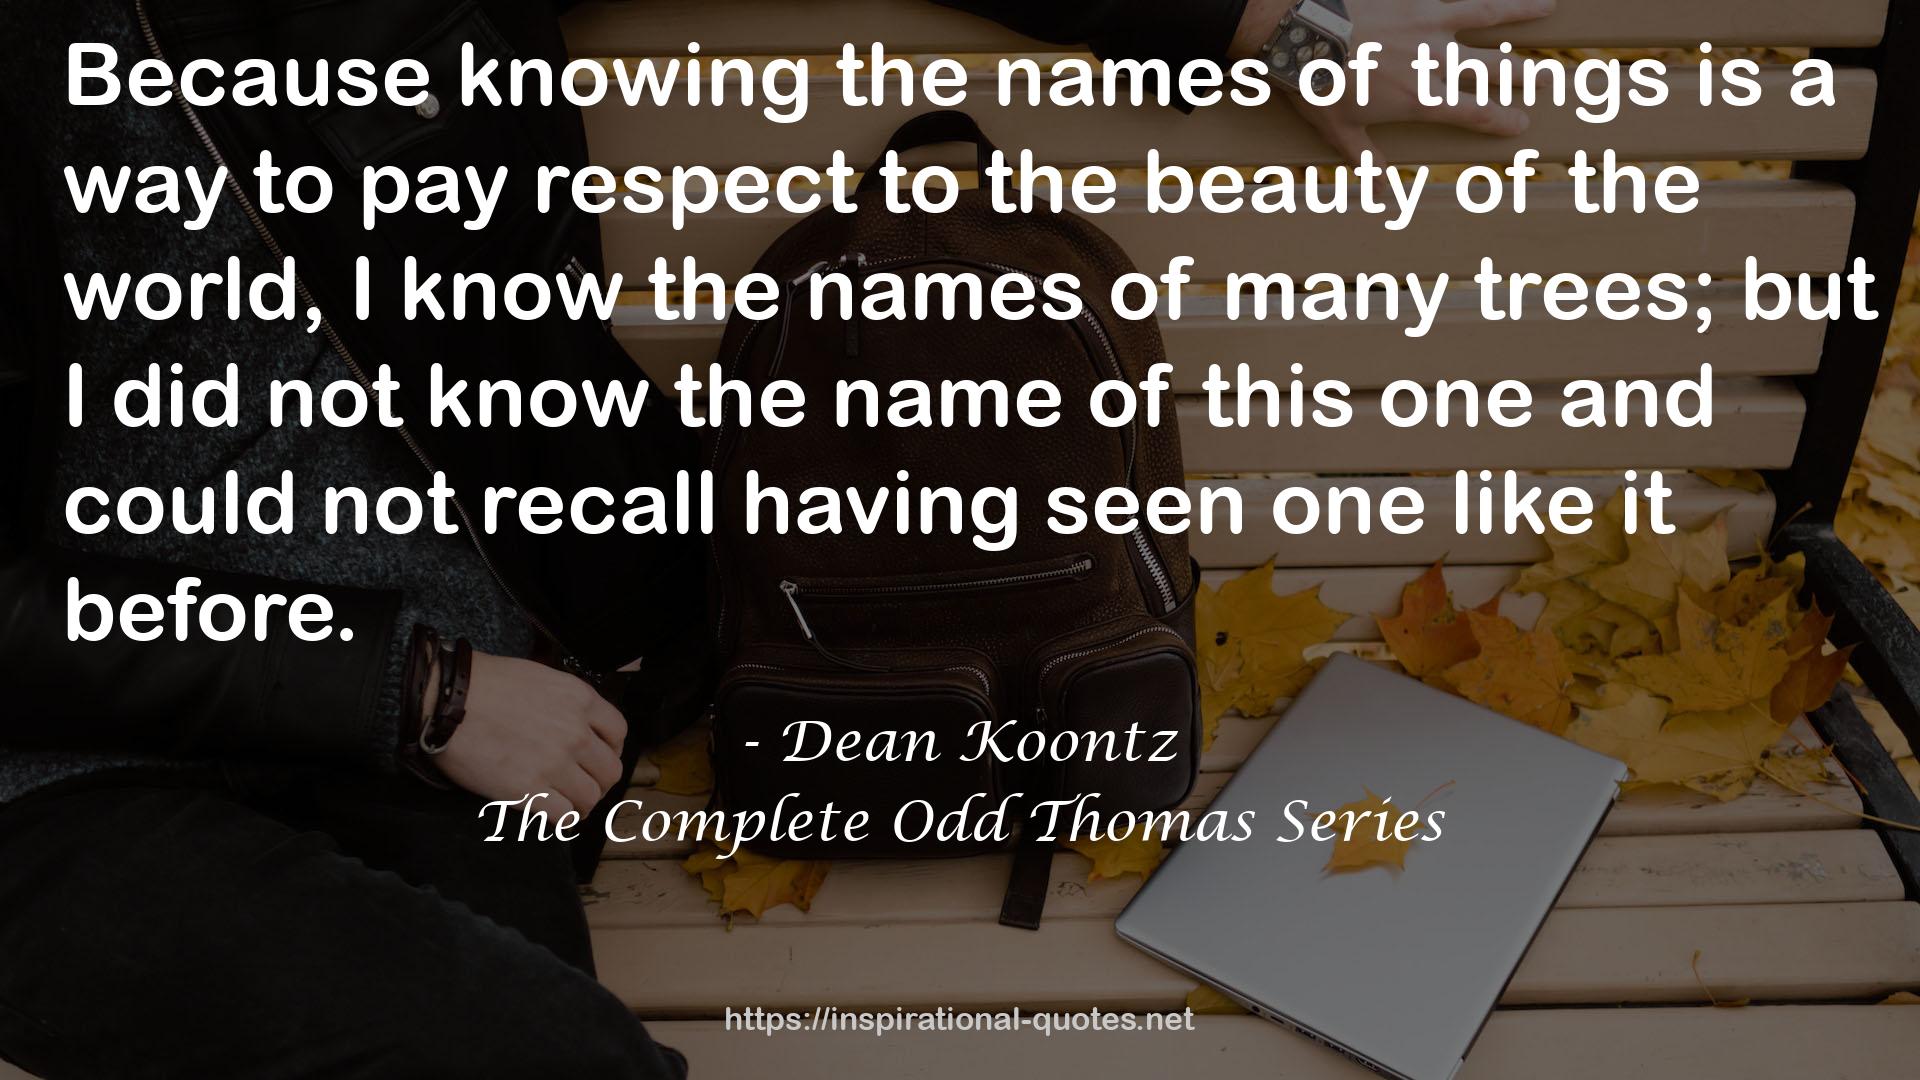 The Complete Odd Thomas Series QUOTES